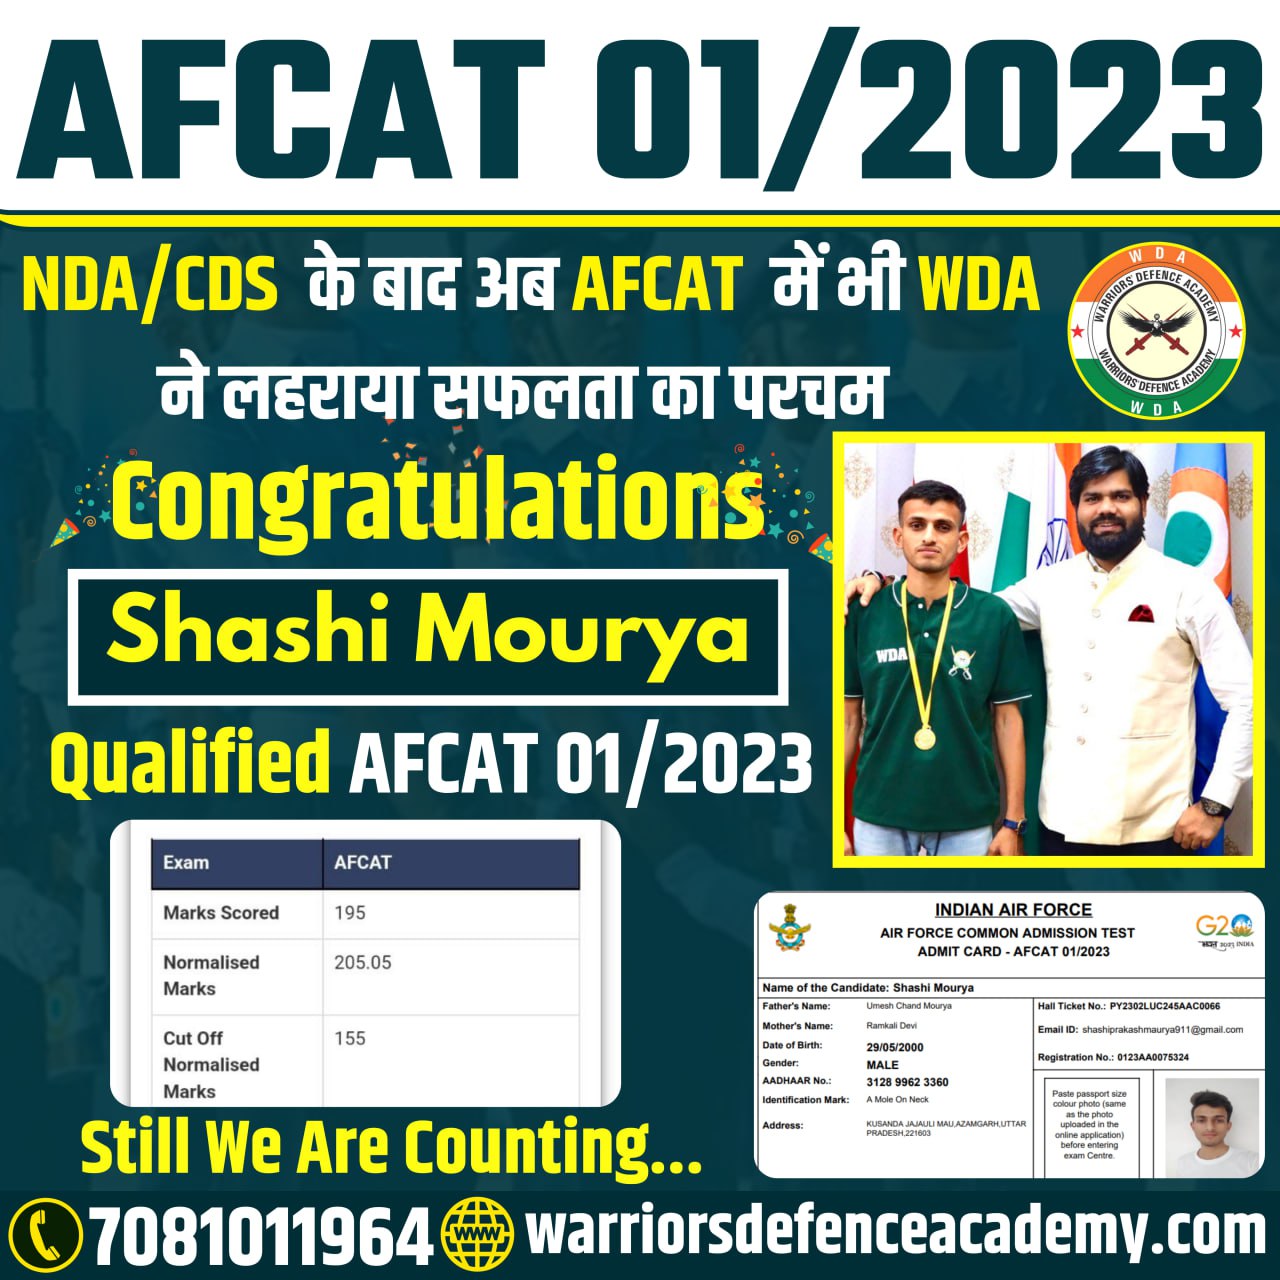 NDA 2 2021 Application Process | Best NDA Coaching in Lucknow India | Warriors Defence Academy Best NDA Coaching in Lucknow